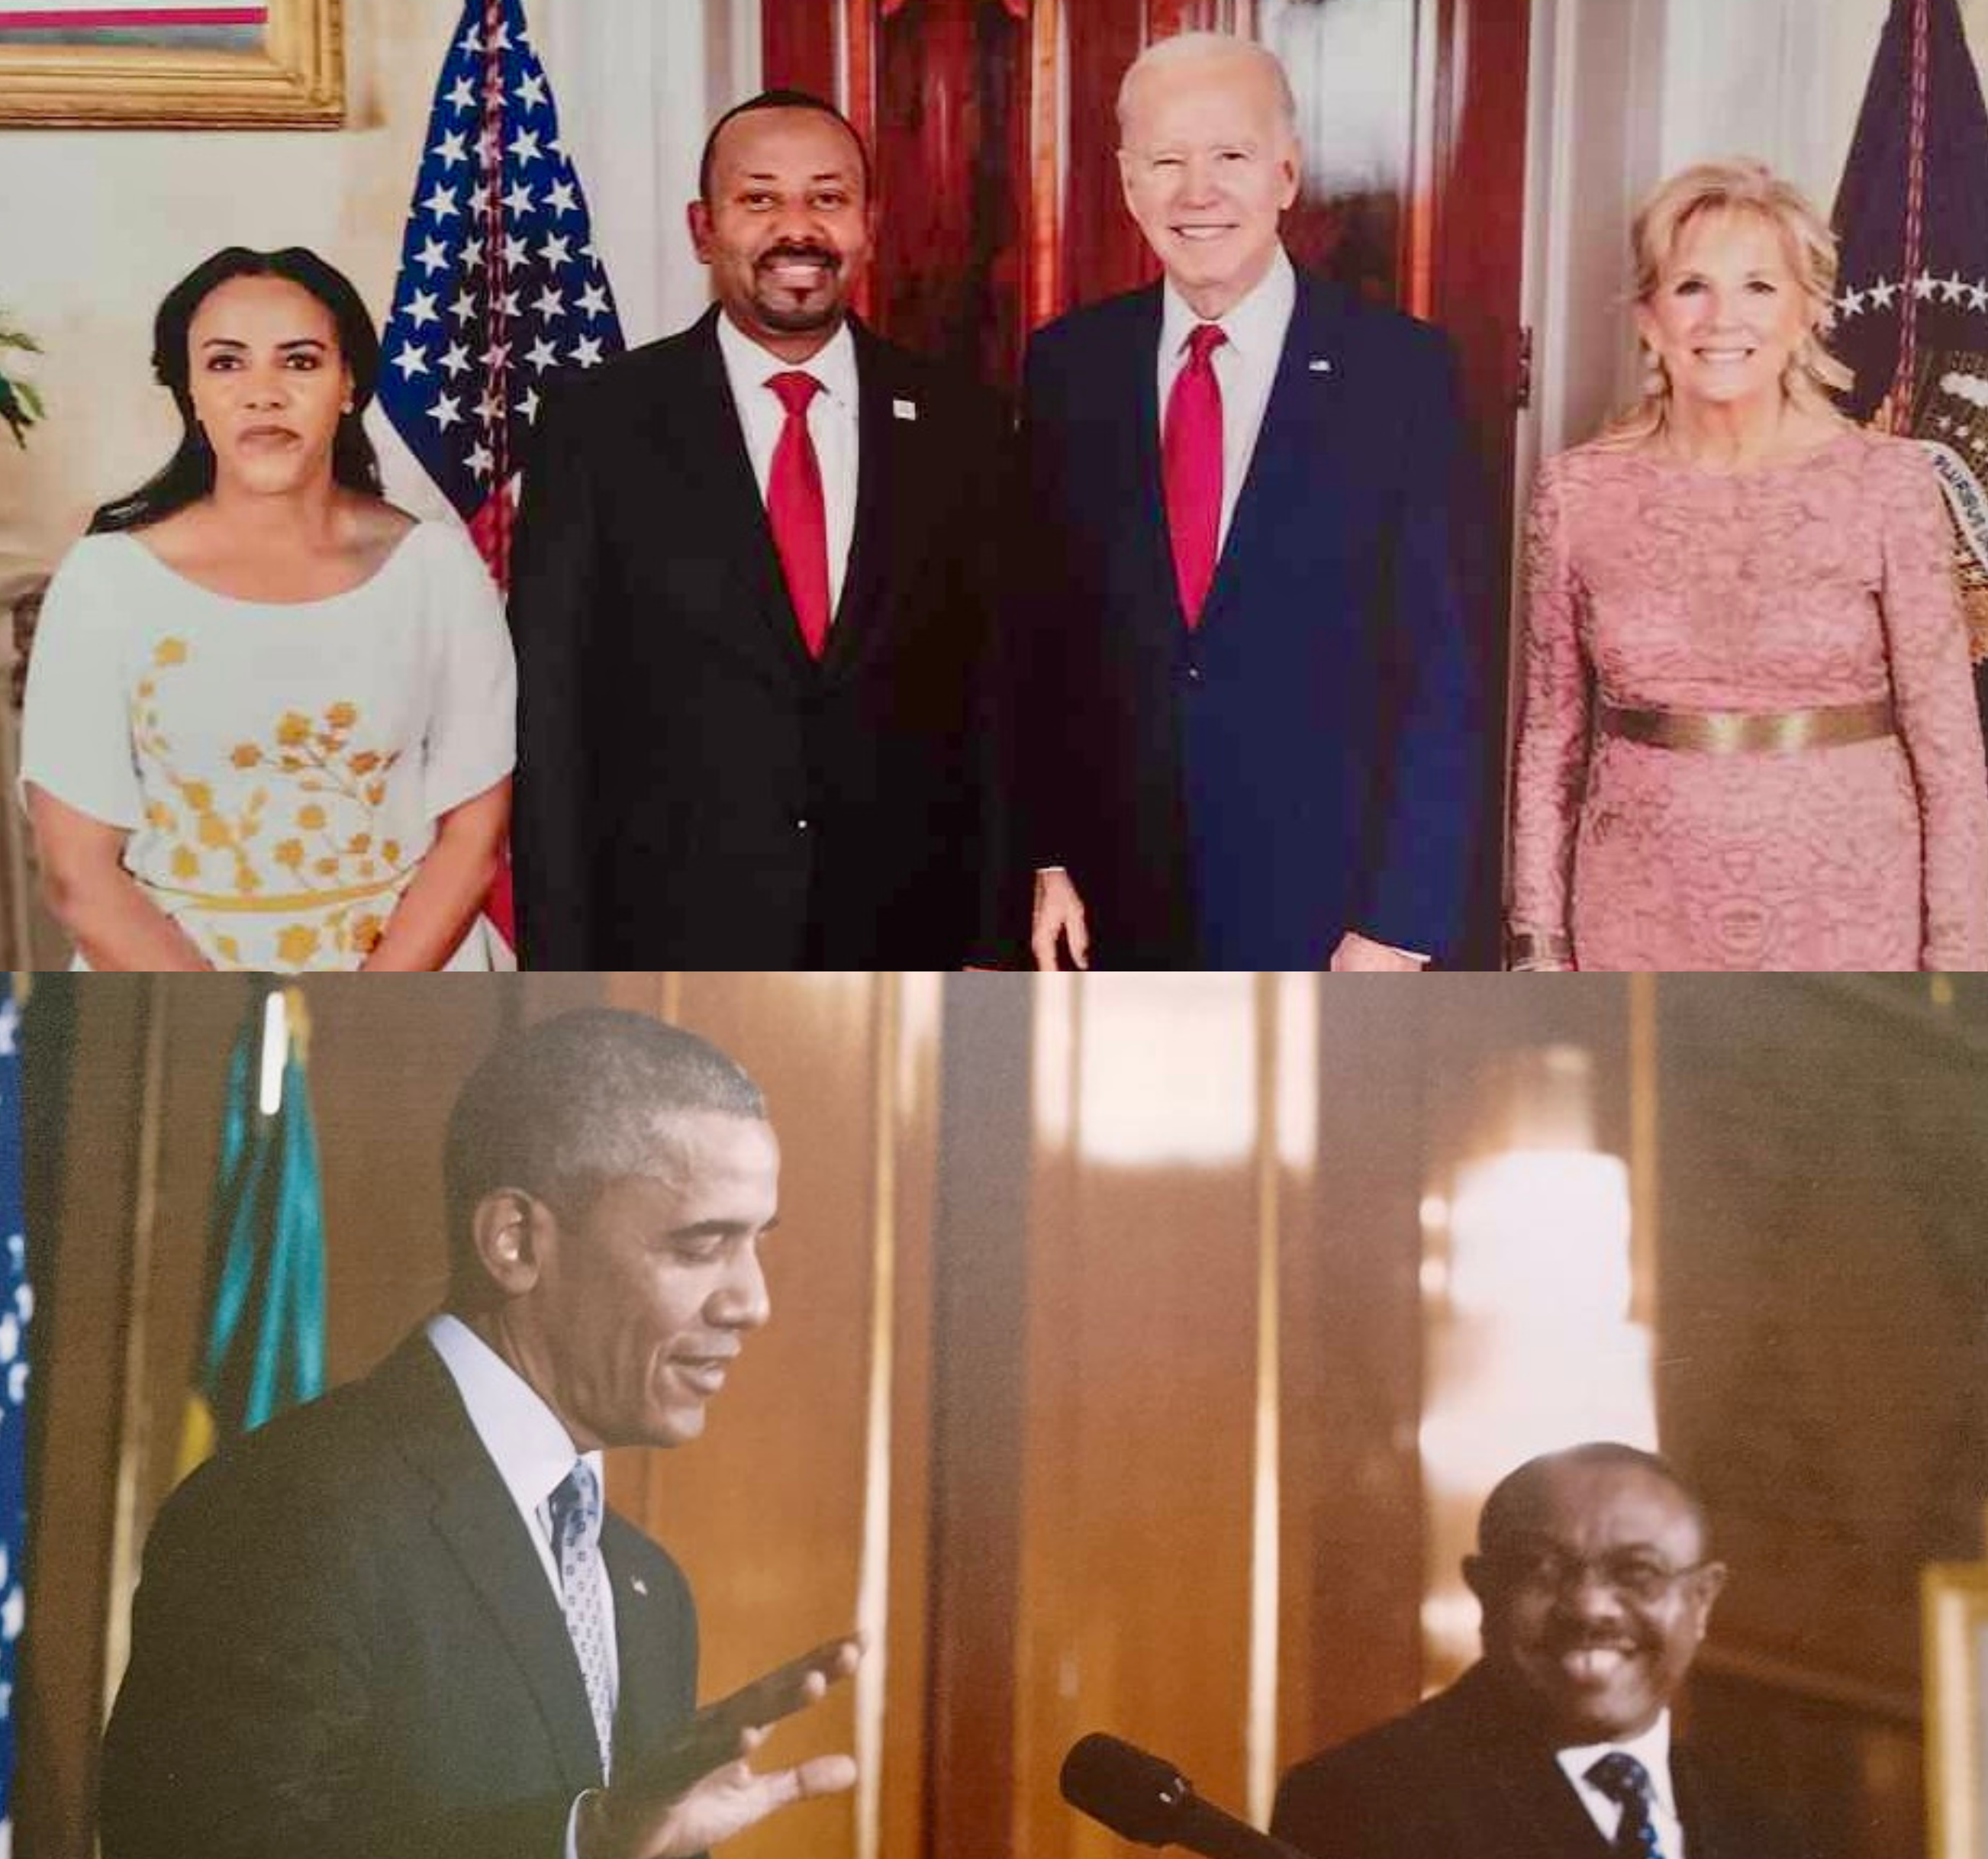 The U.S. Embassy in Addis Ababa Inaugurated a Photo Exhibition at National Museum.